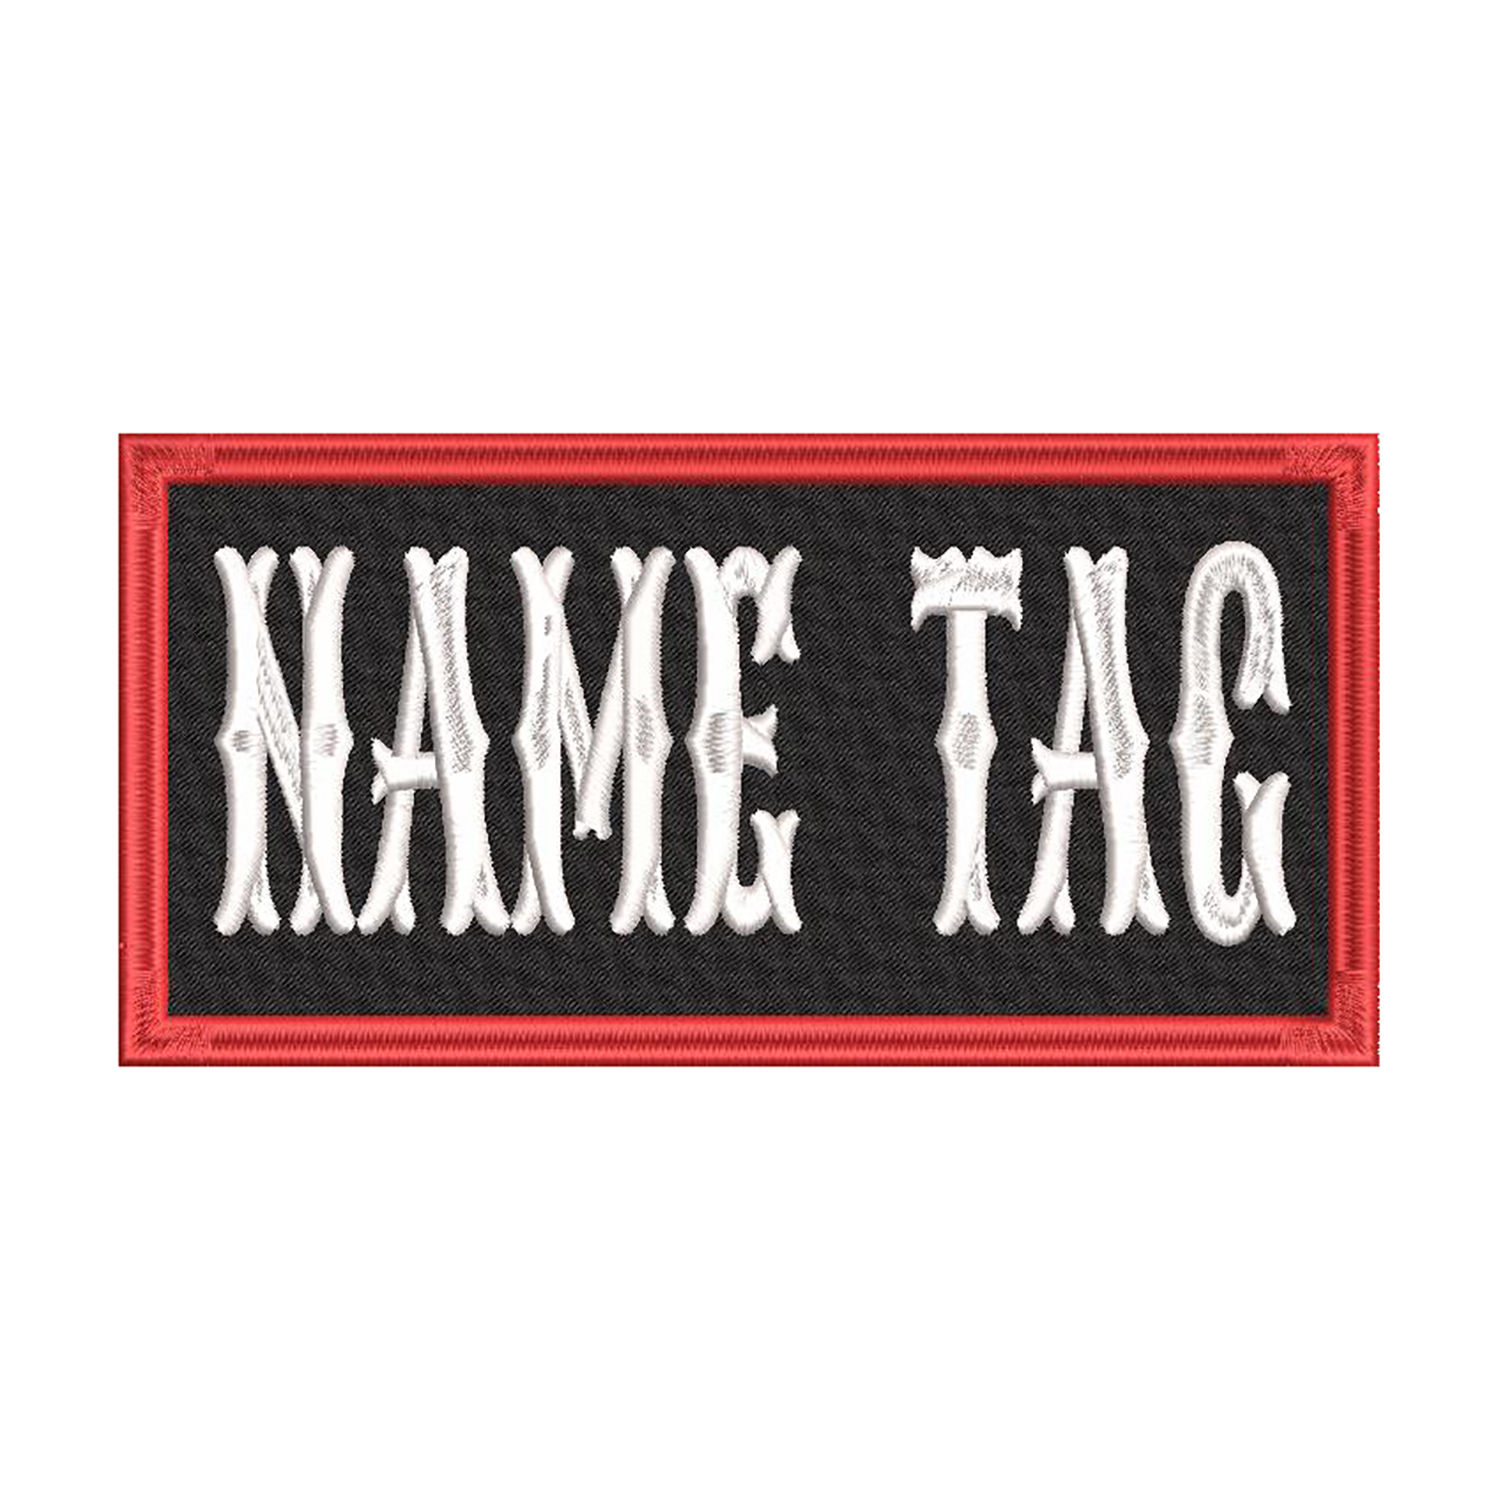 4 x 2 Custom Embroidered Name Tag Biker Patch